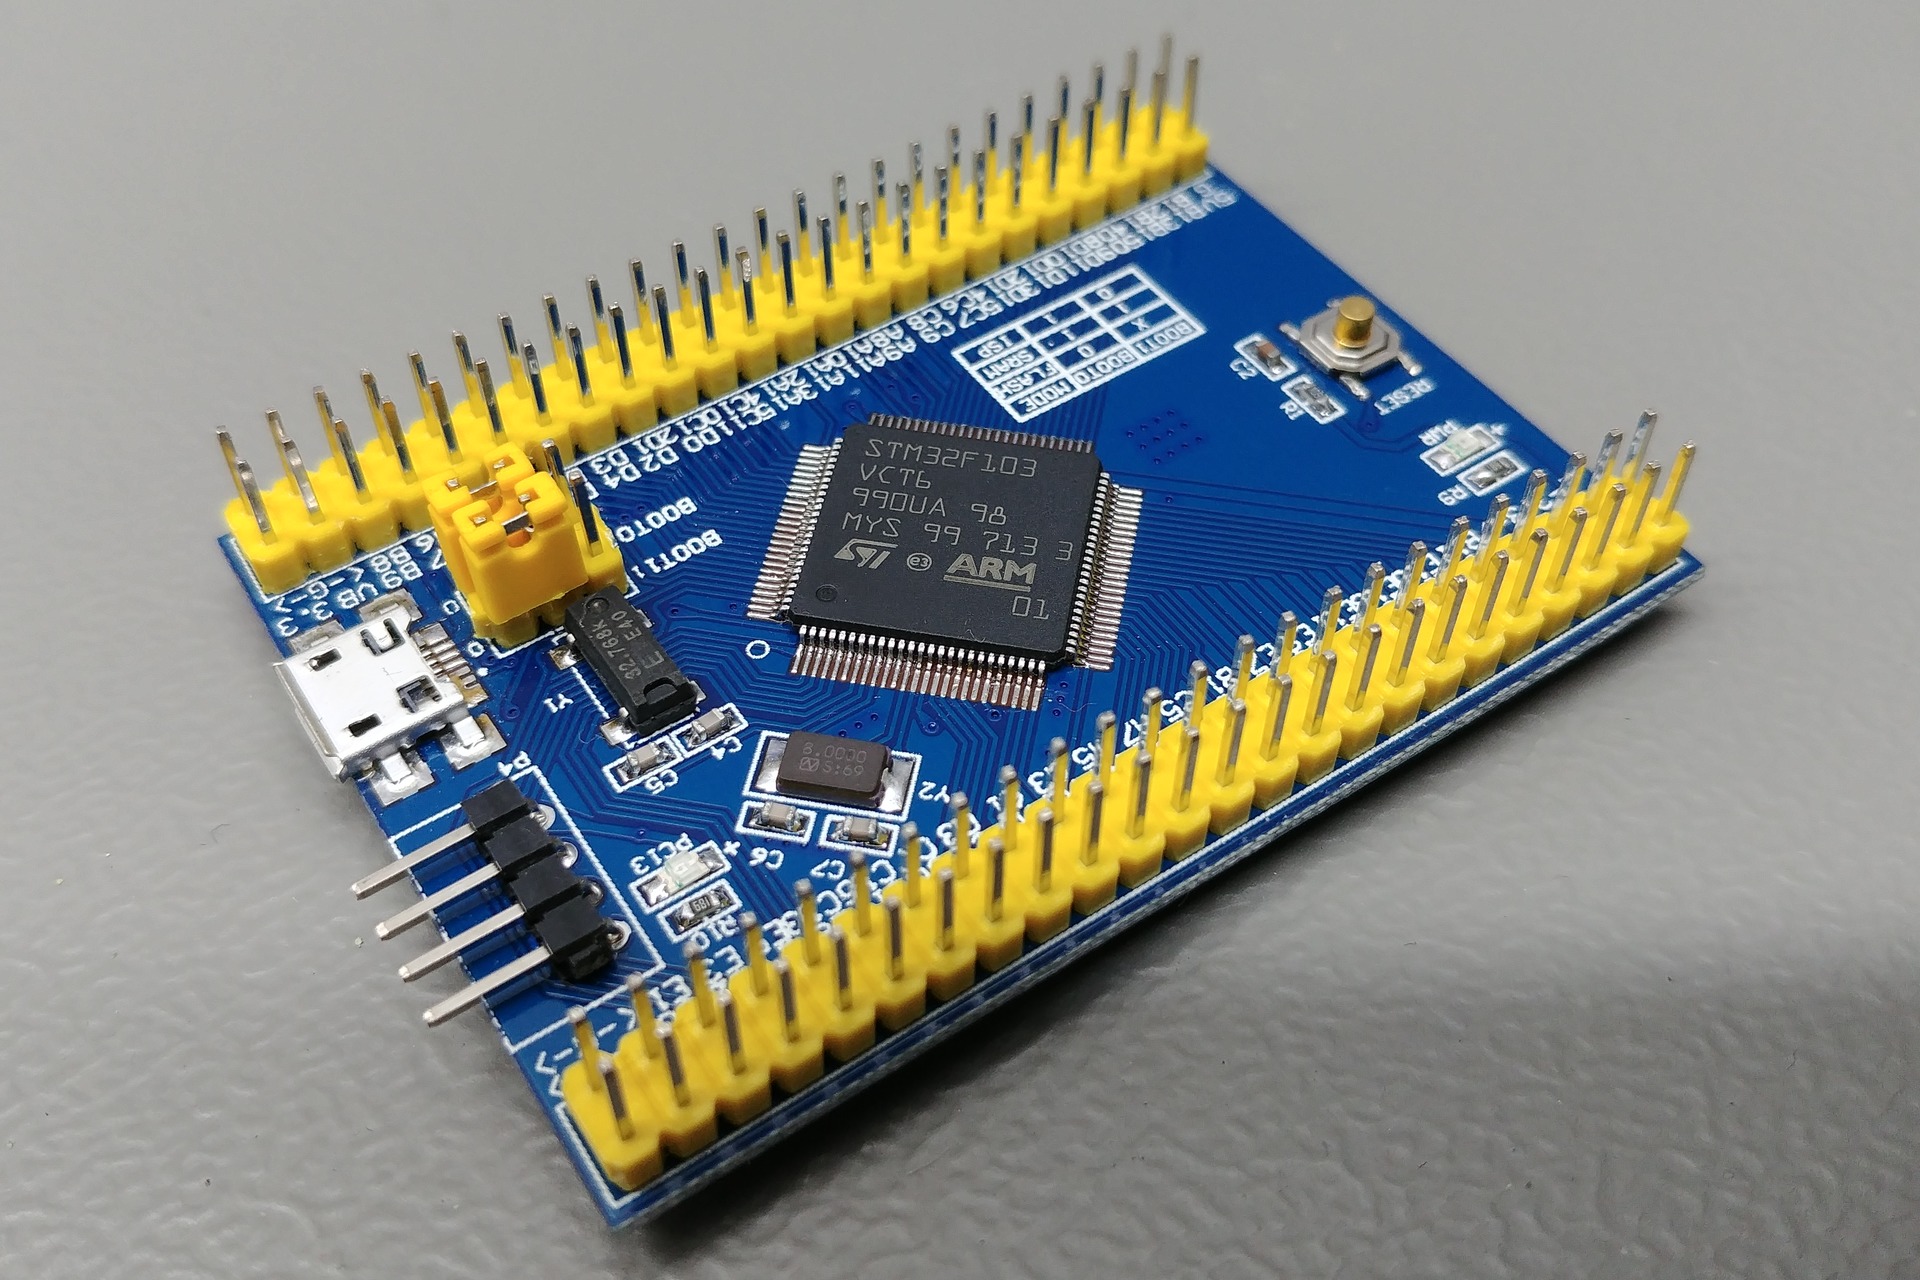 Picture of the vcc-gnd.com STM32F103VCT6